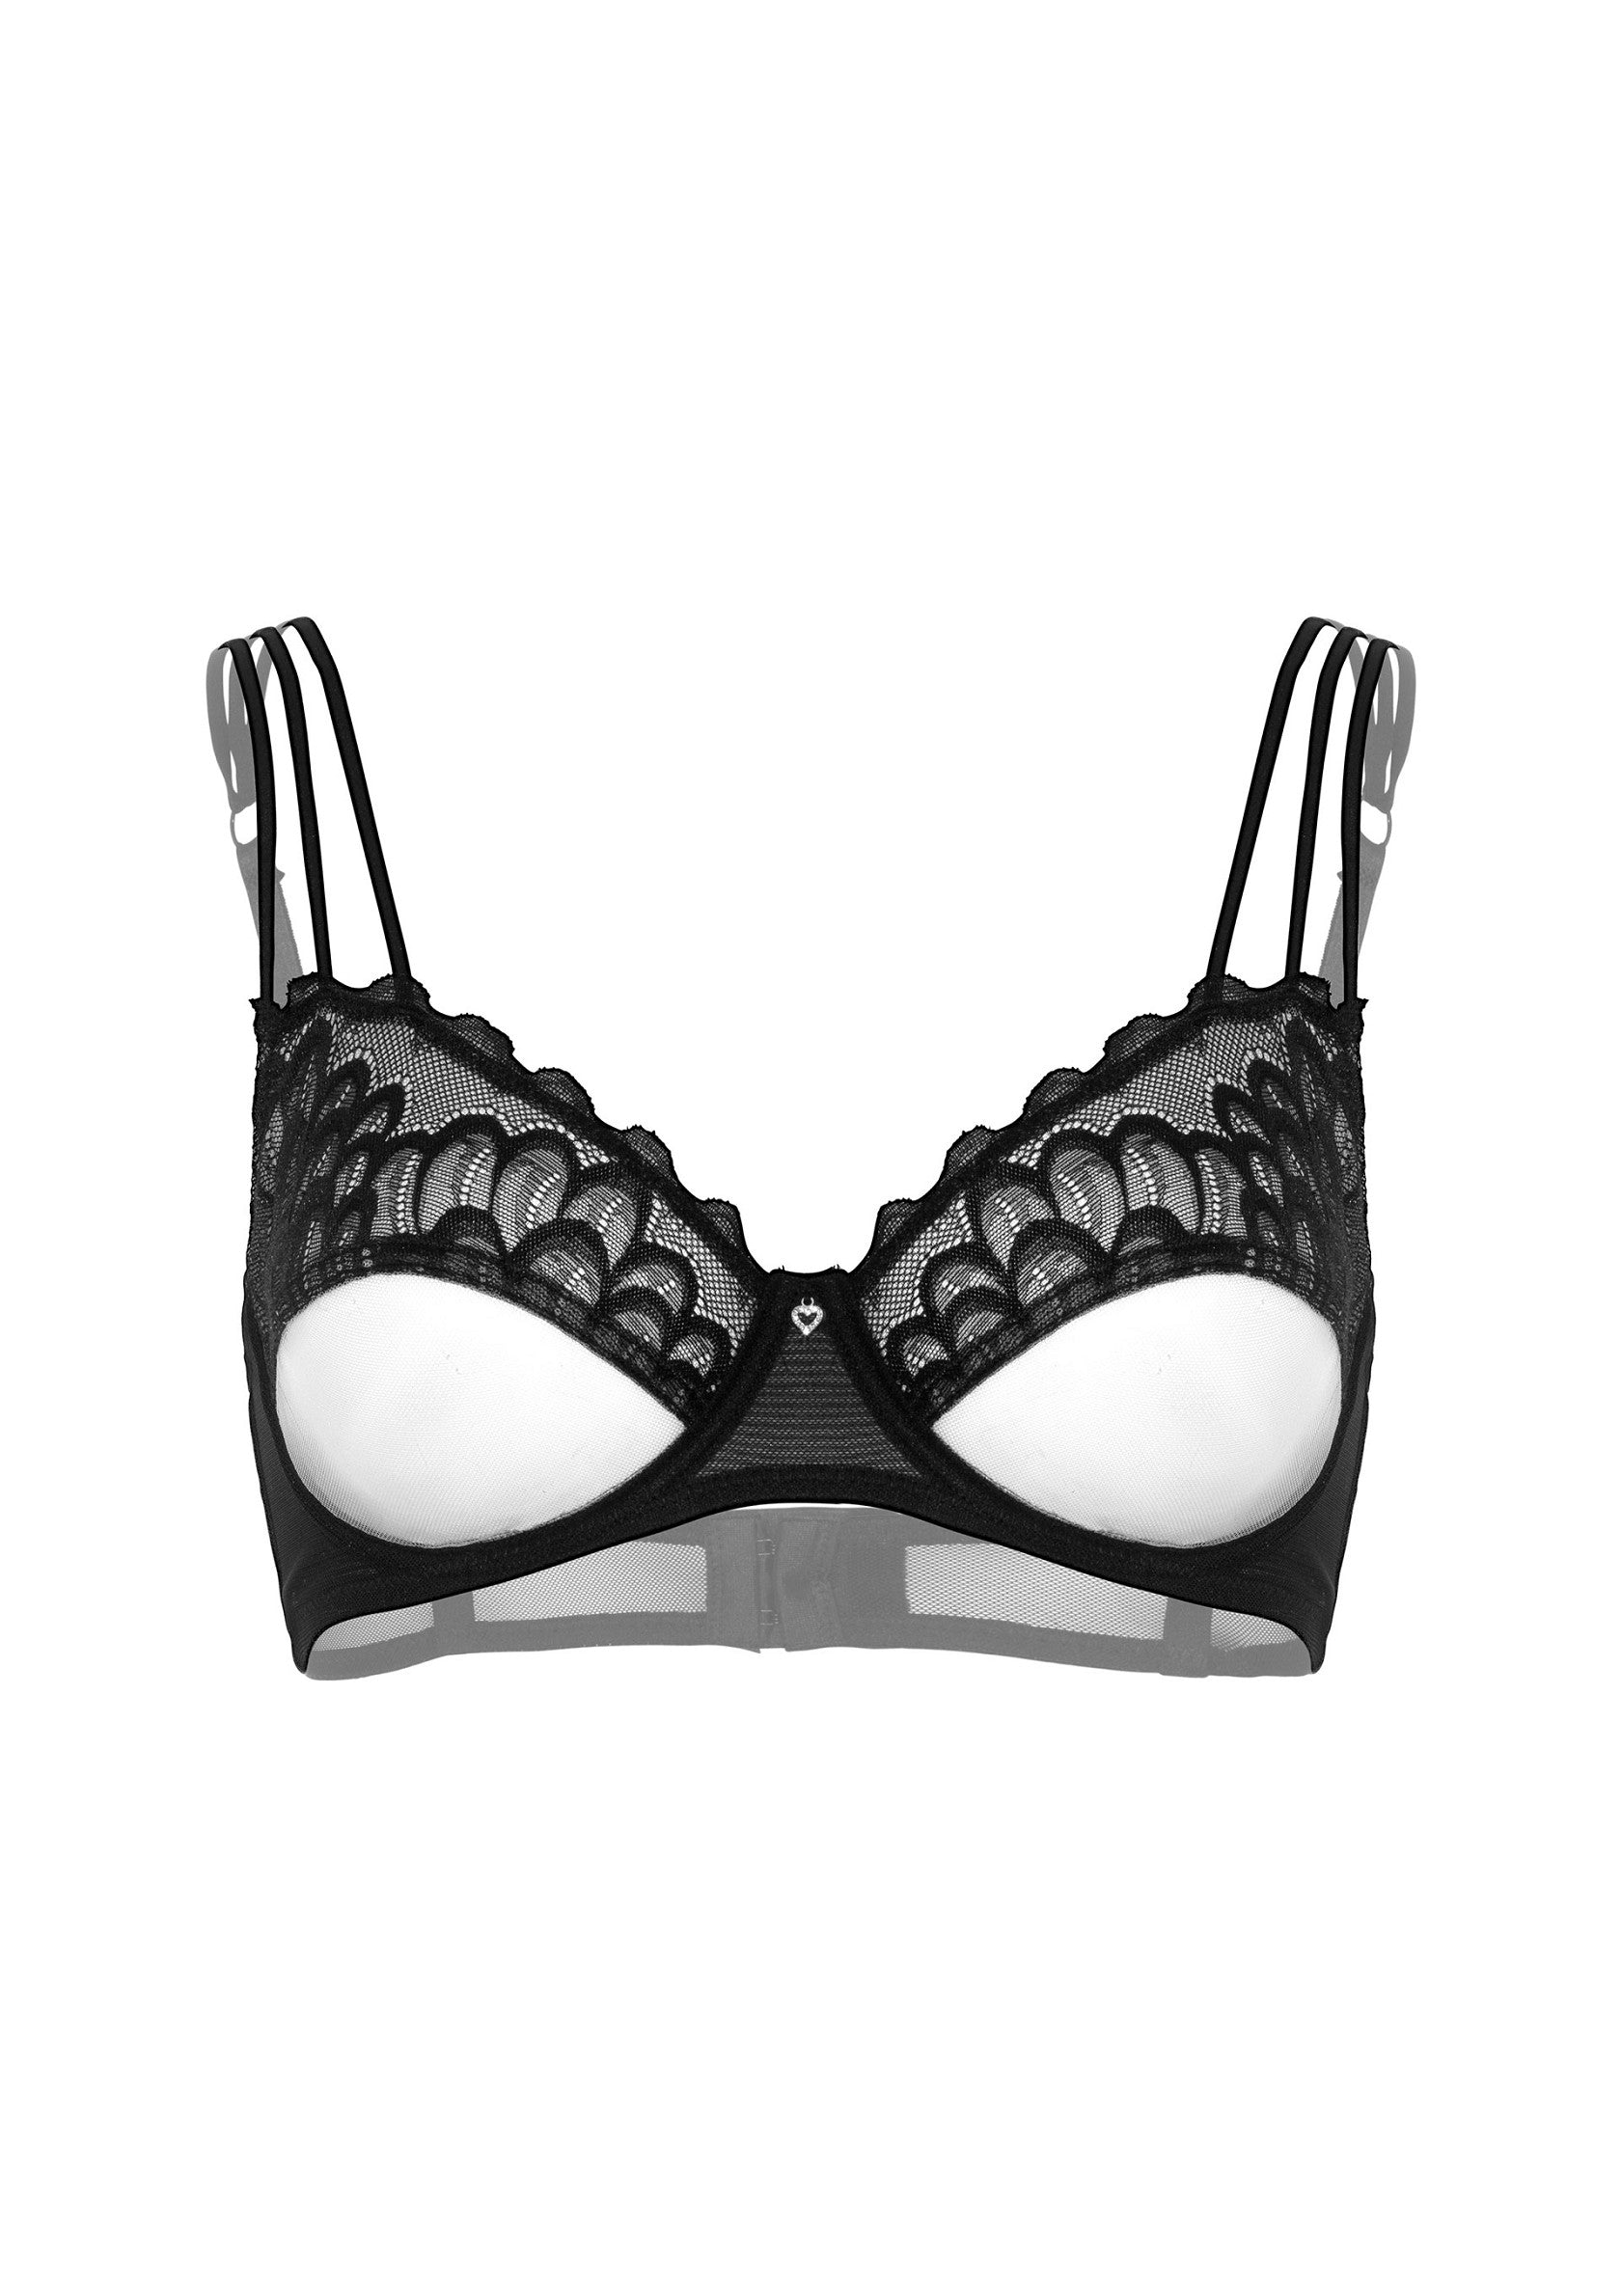 Daring Intimates Mix & Match Unlined bra with faux underbust BLACK 75B - 7